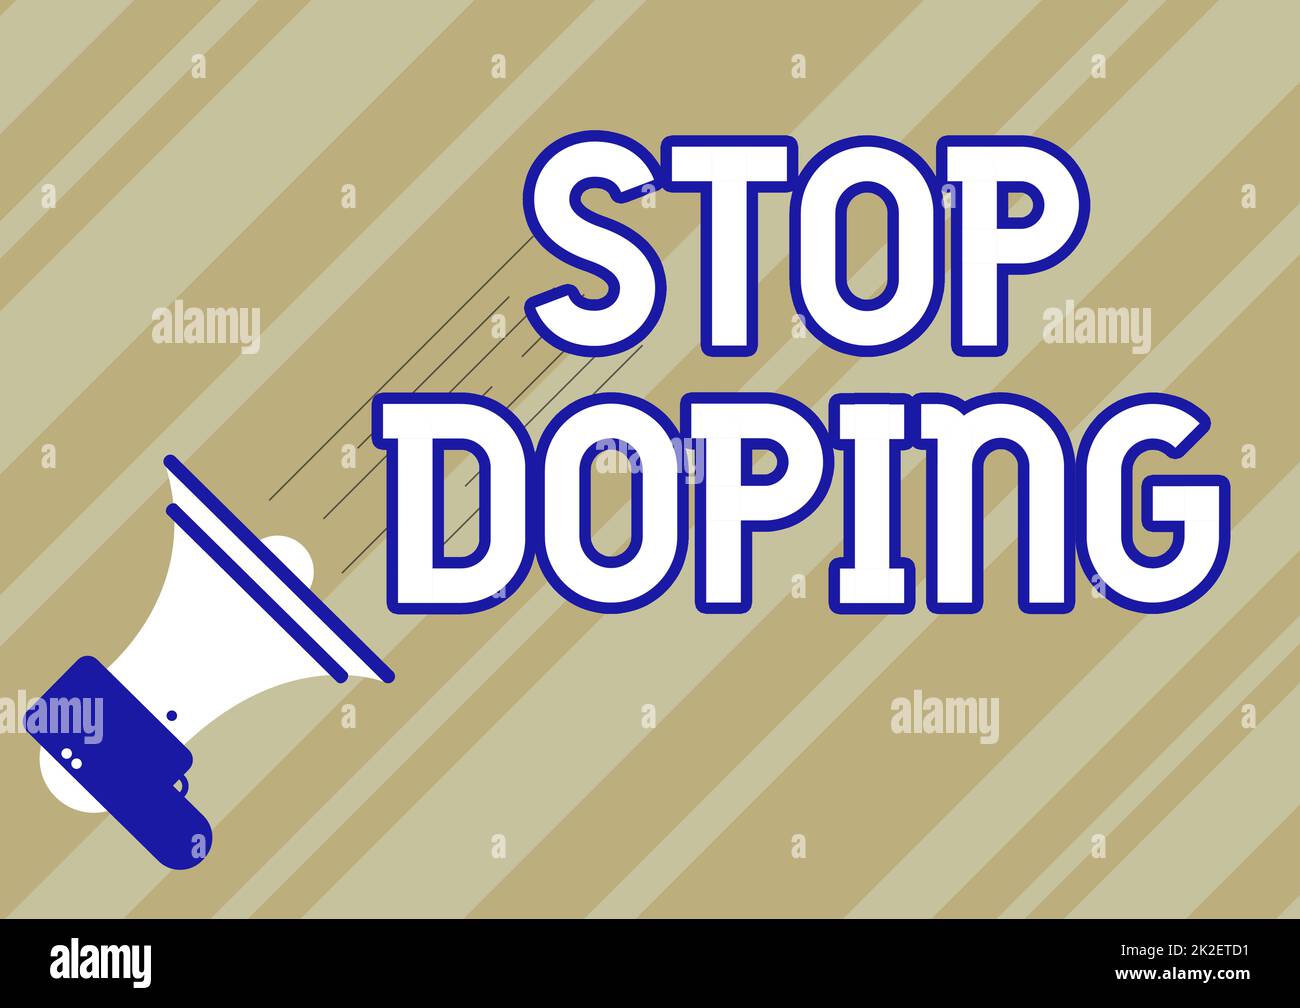 Sign displaying Stop Doping. Business concept do not use use banned athletic performance enhancing drugs Illustration Of A Megaphone Making Fast Important Announcement. Stock Photo